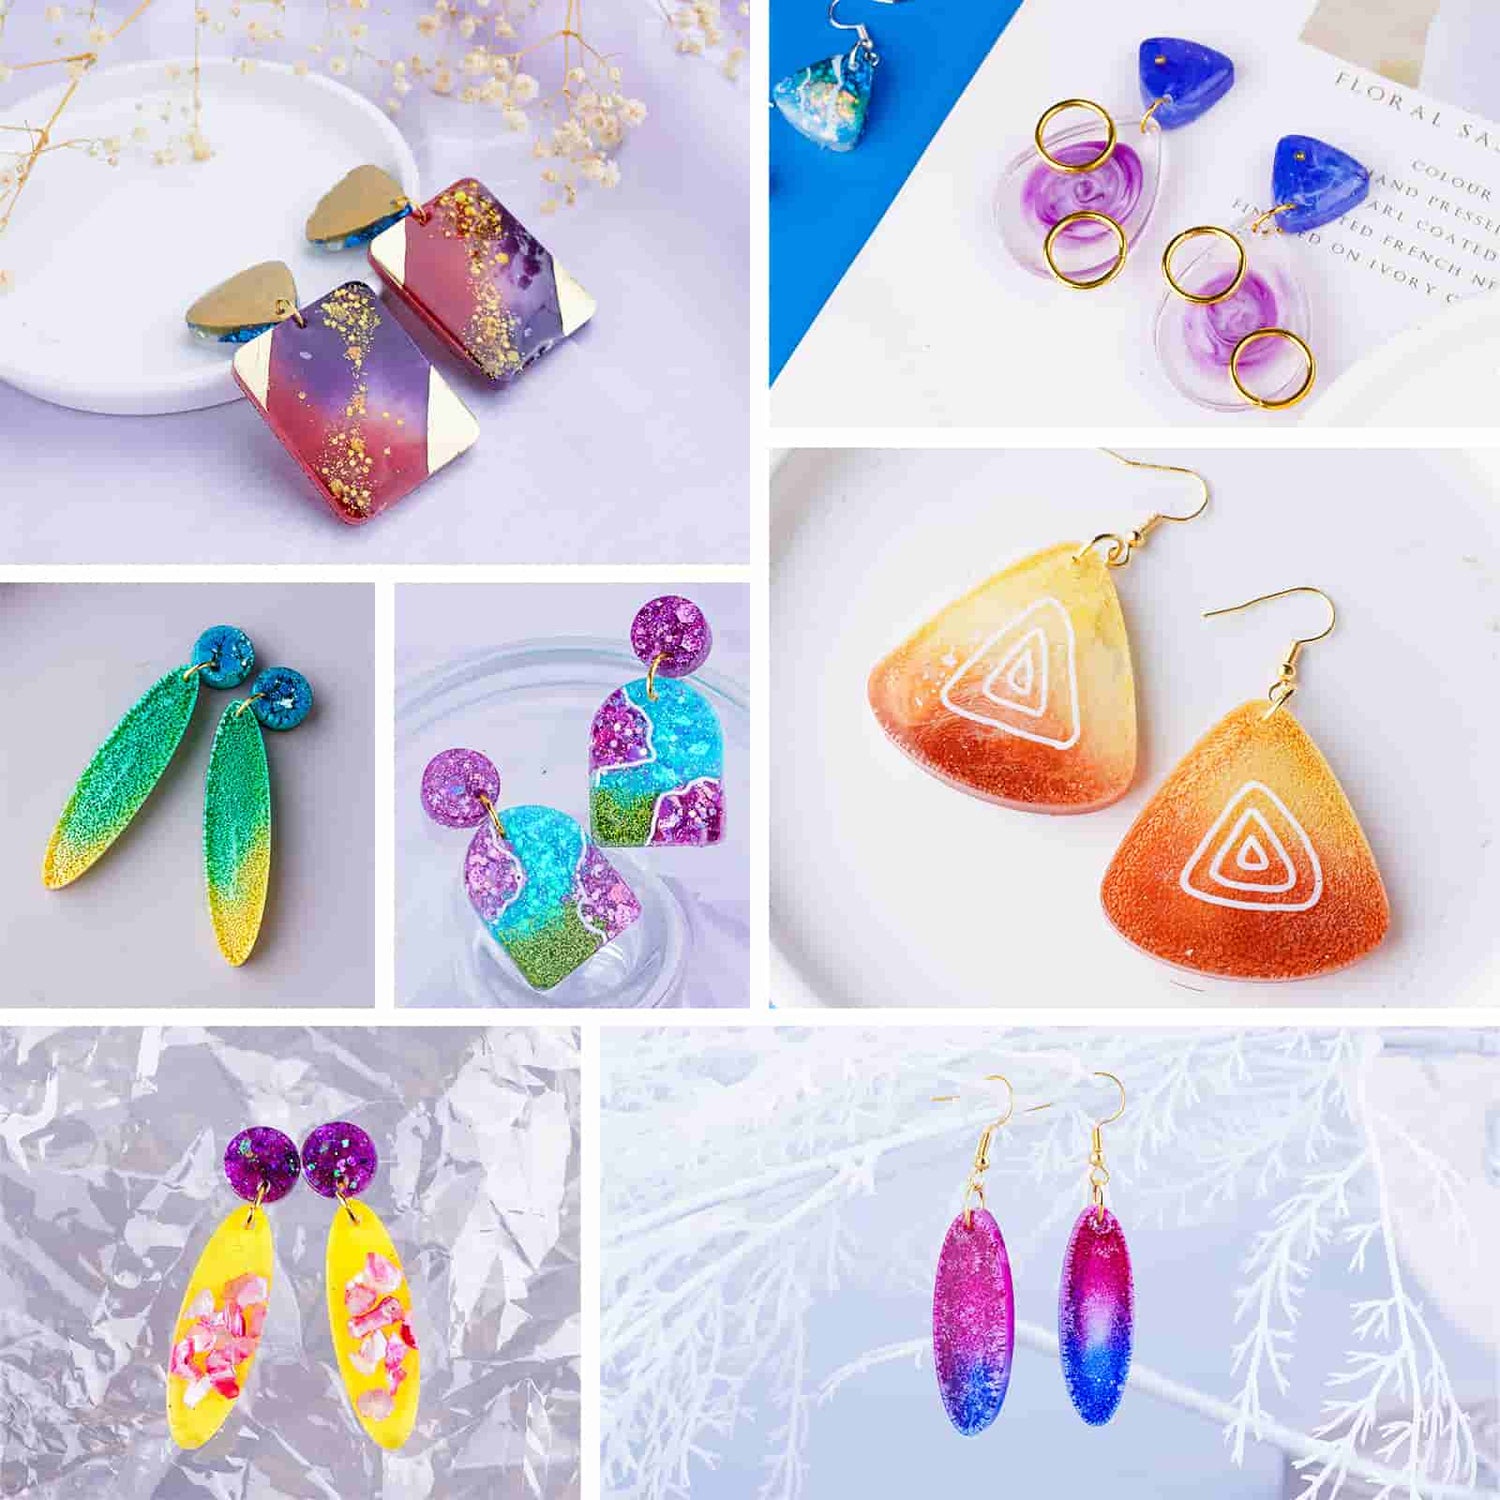 LET'S RESIN 198PCS Resin Jewelry Molds, with 8 Pairs Earring Resin Molds,  Resin Earring Molds Silicone for Jewelry, Earring Hooks, Jump Rings